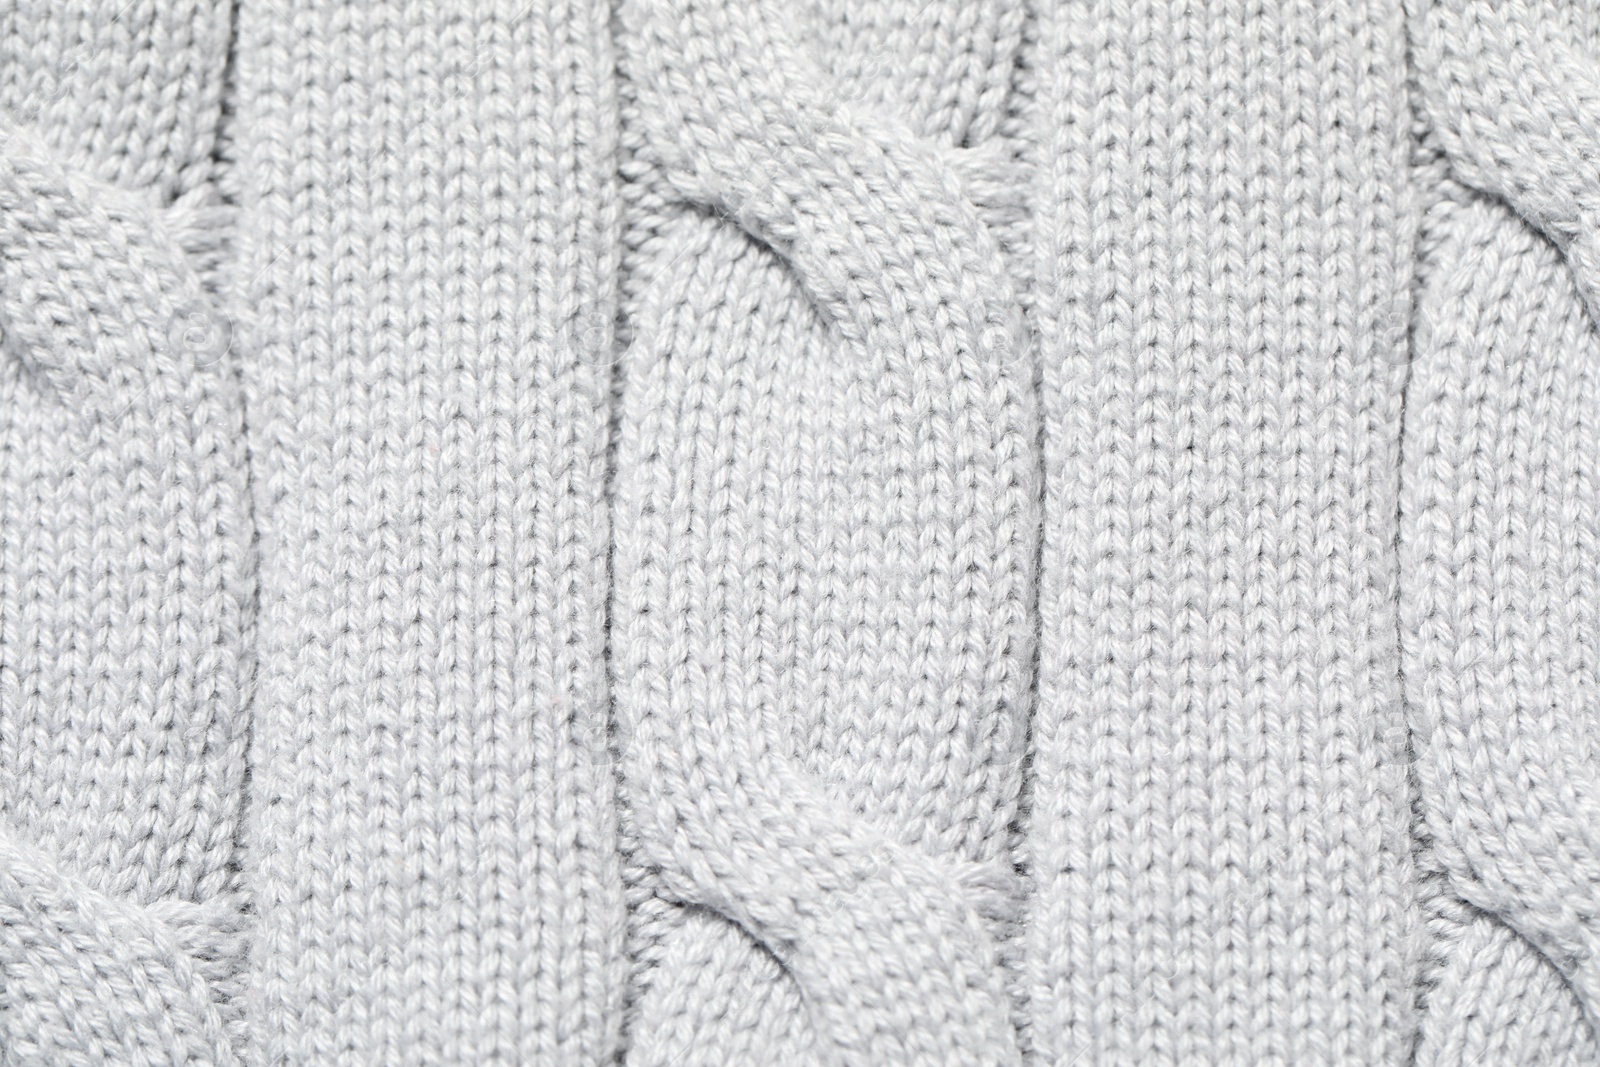 Photo of Texture of soft light knitted fabric as background, top view